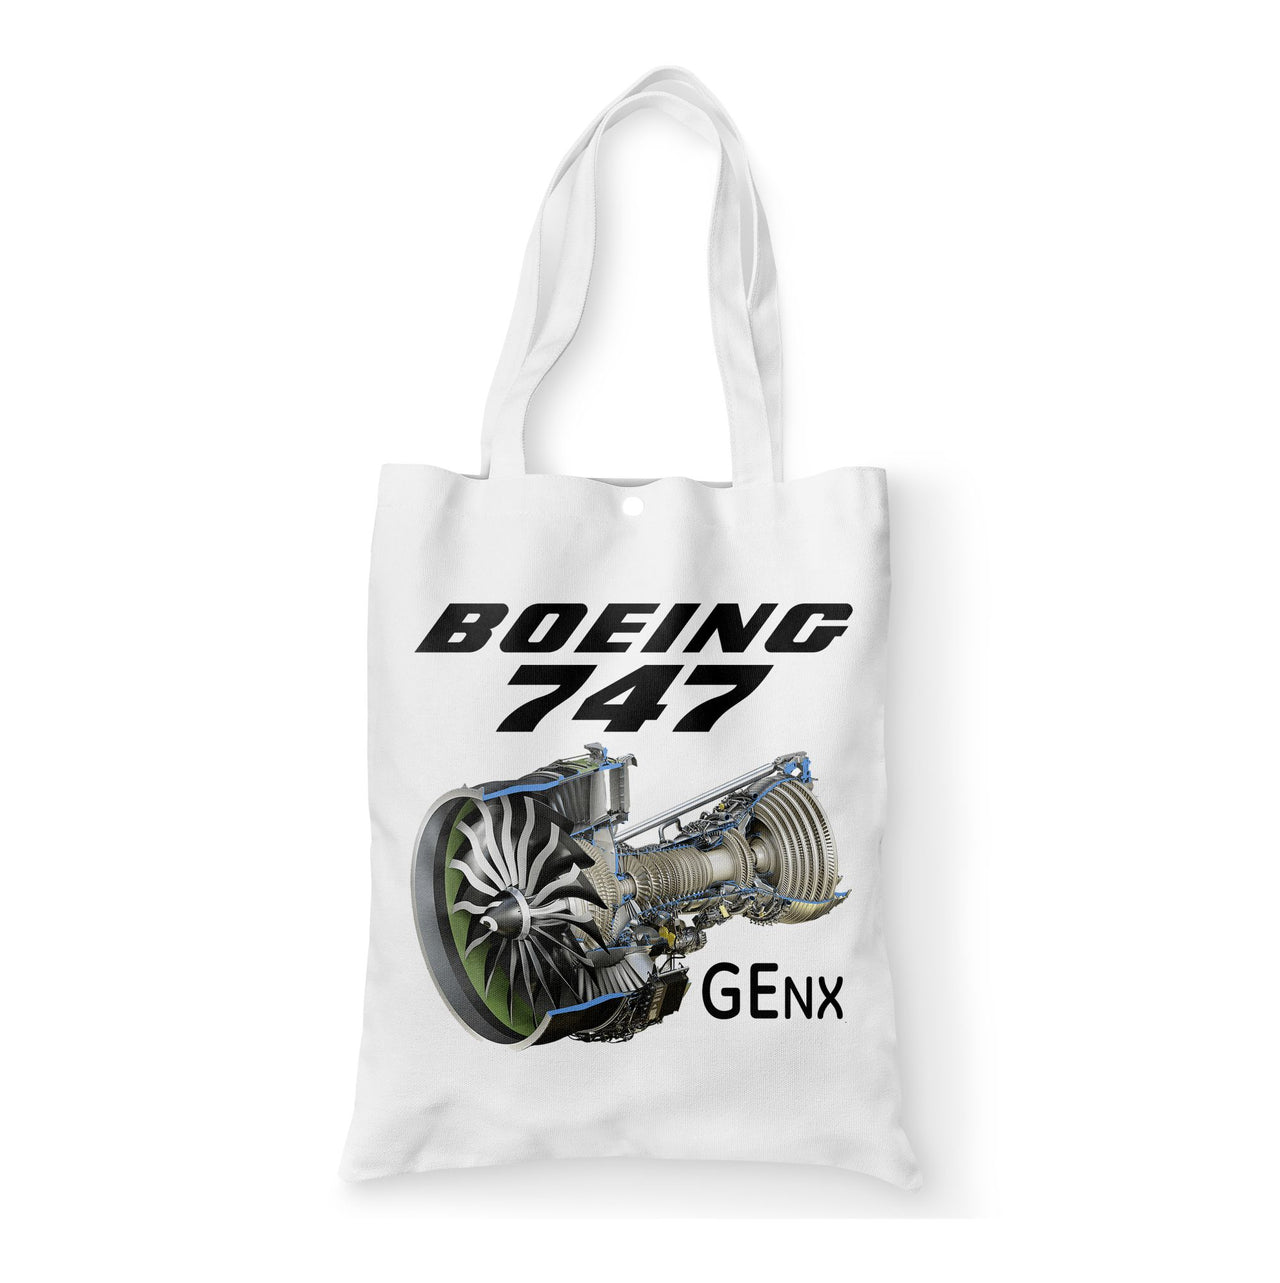 Boeing 747 & GENX Engine Designed Tote Bags